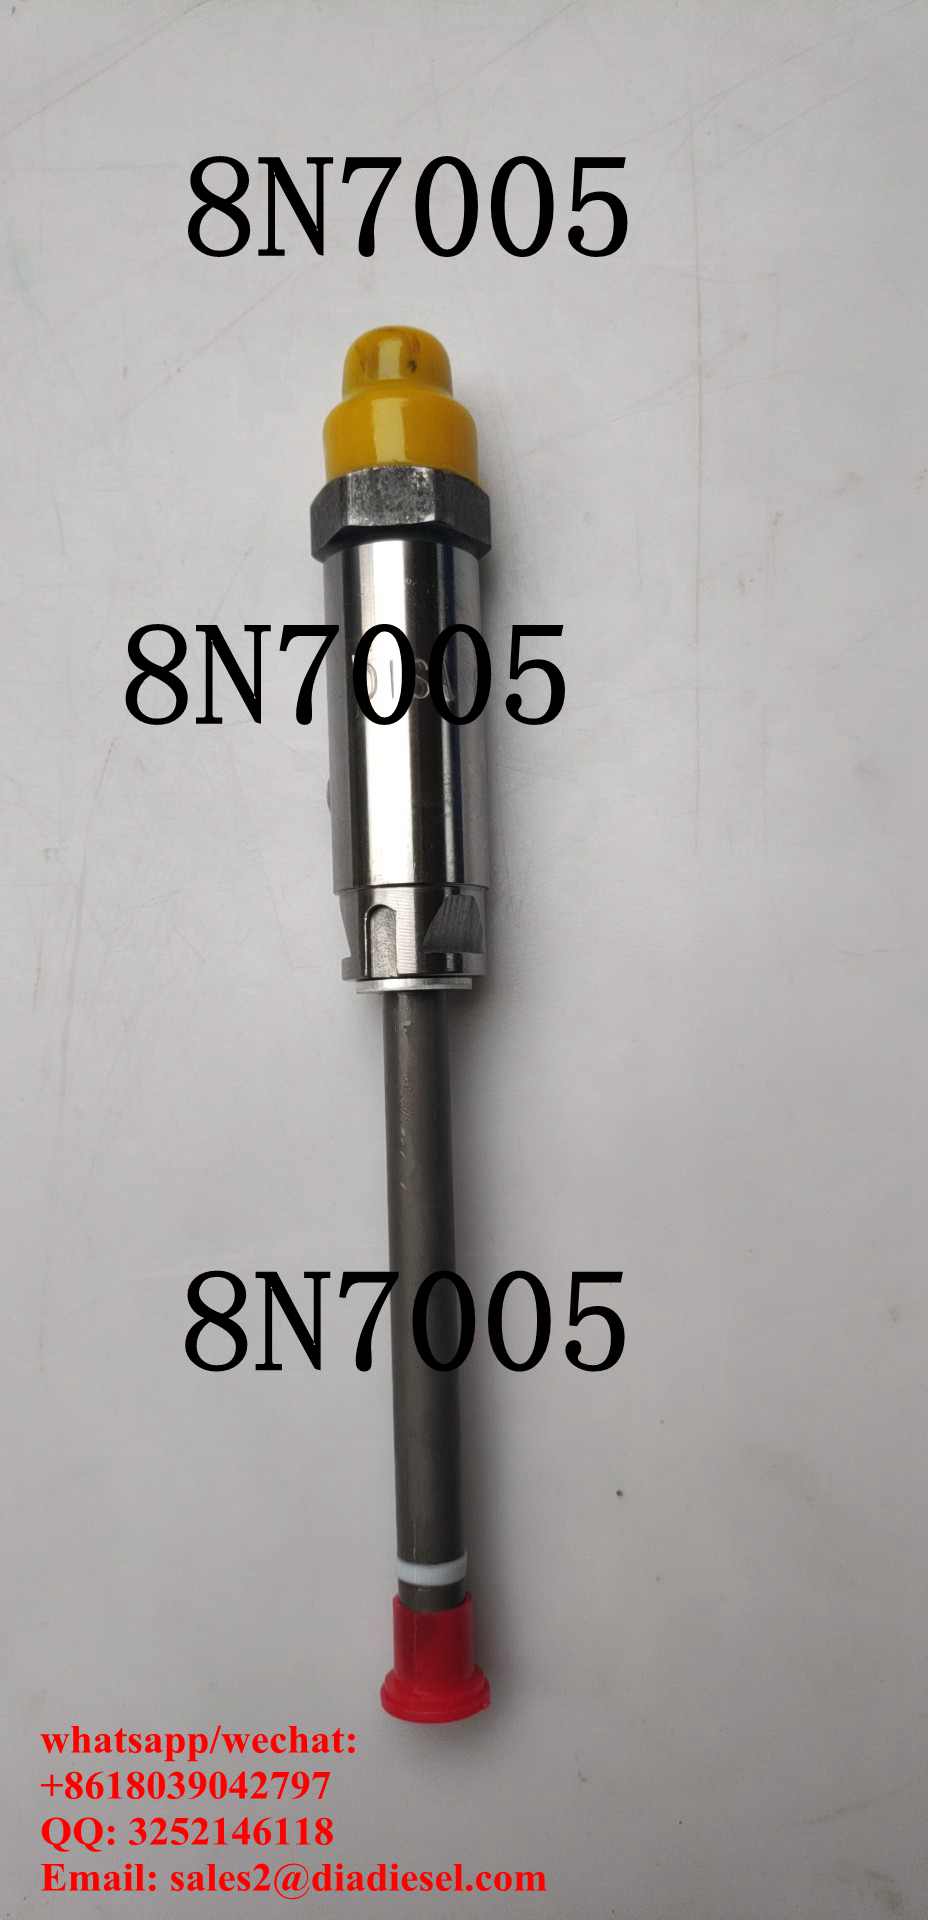 Diesel Fuel Injector Nozzle 8N7005 for Engine 3306